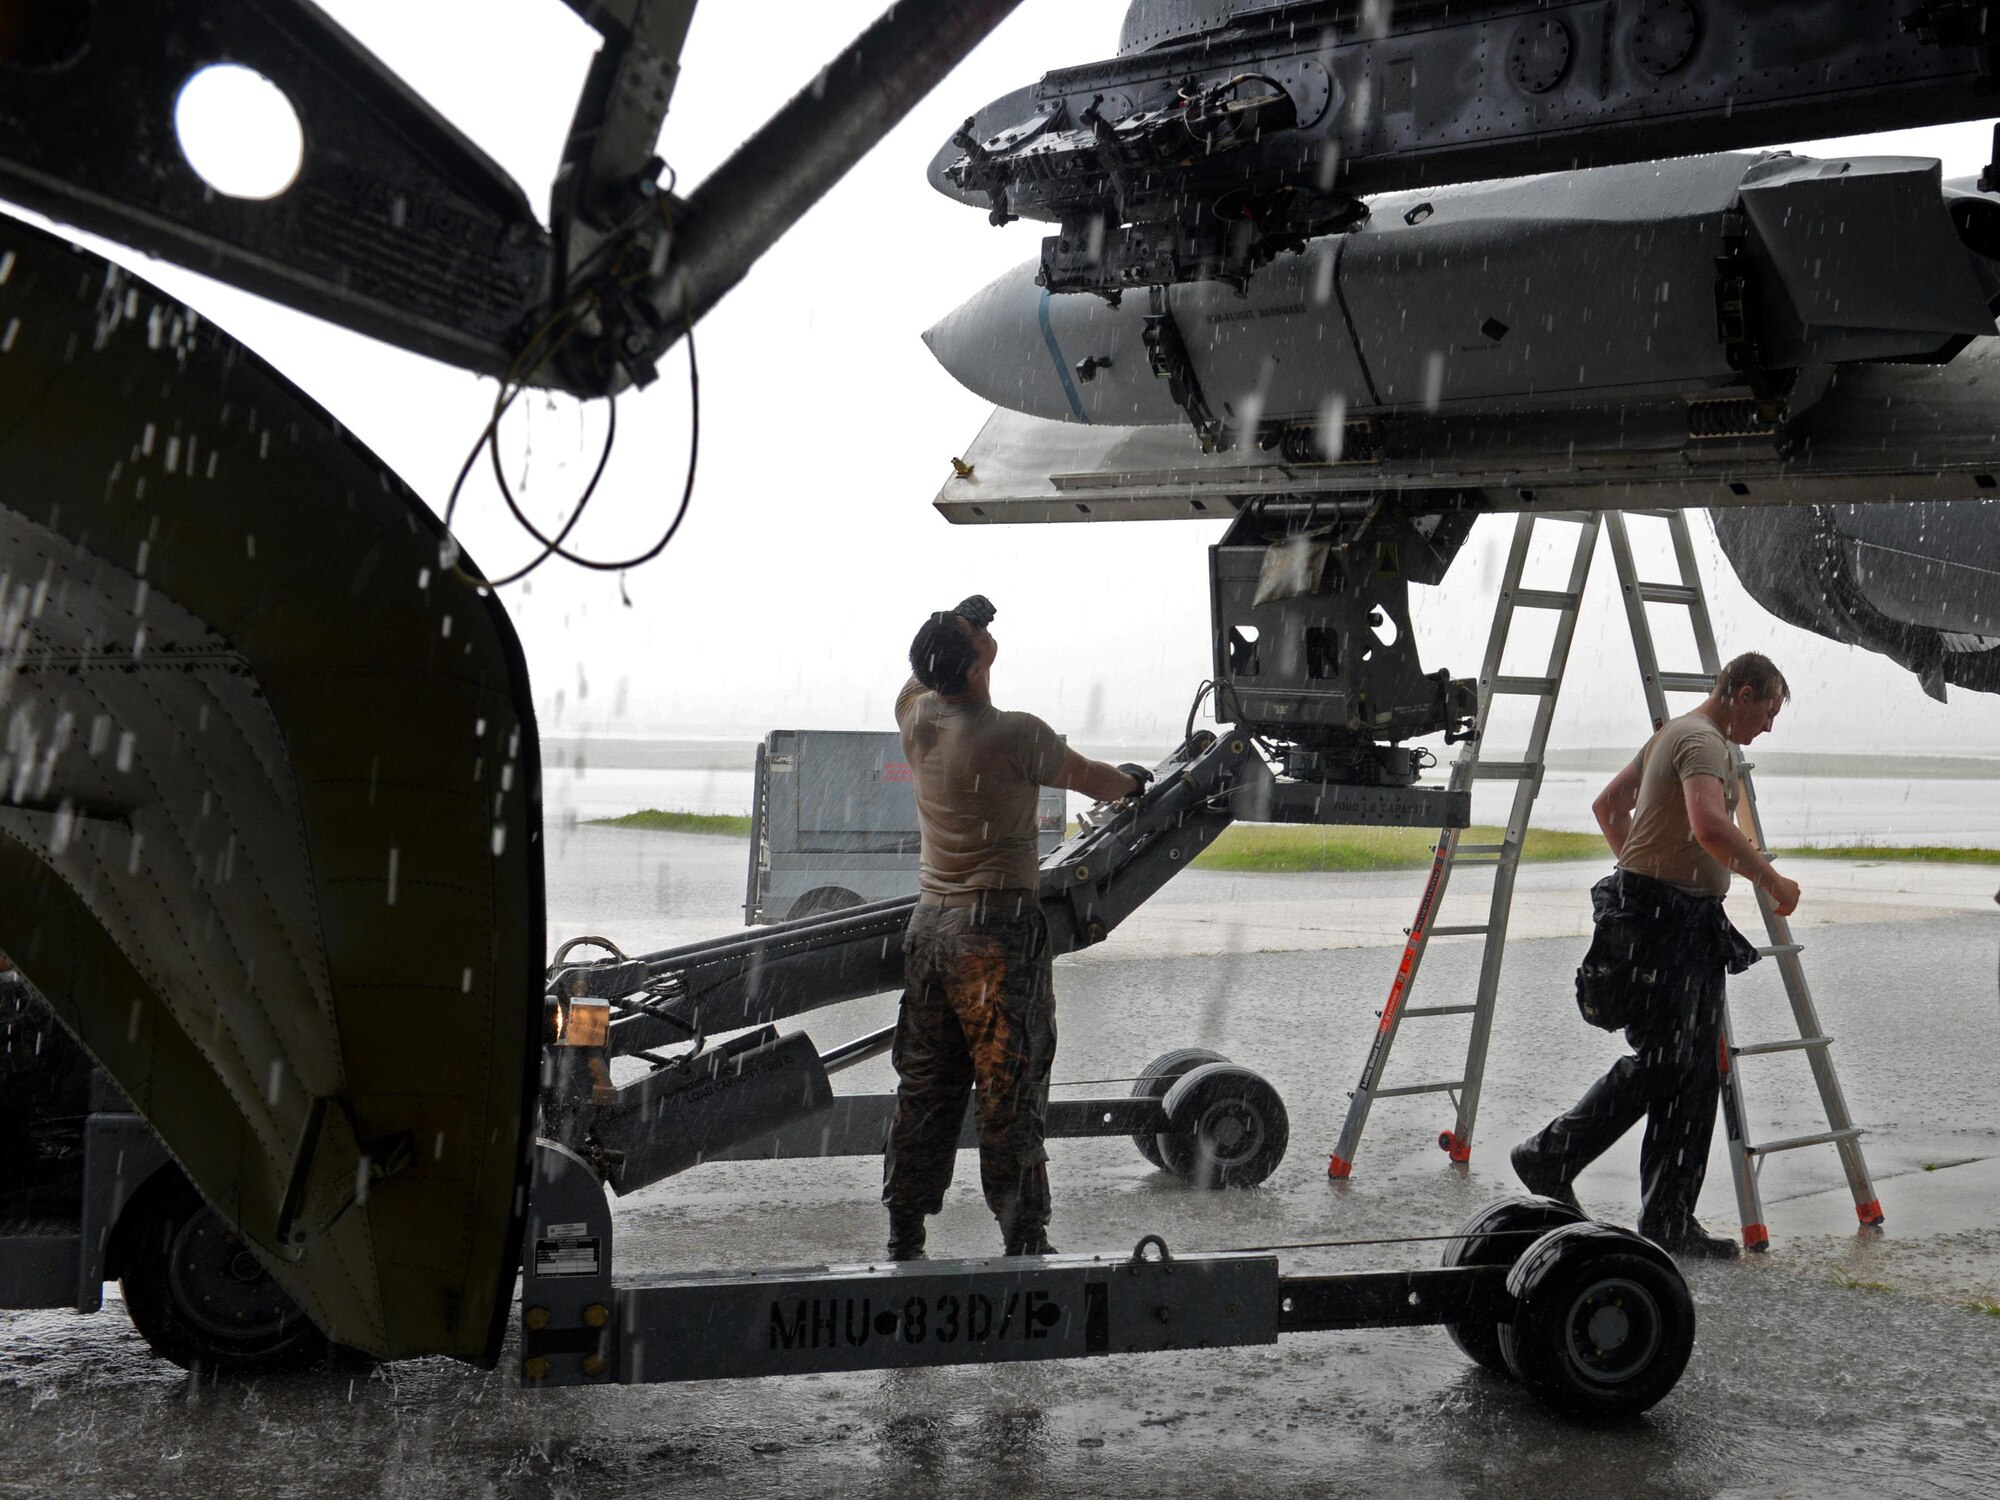 Airman 1st Class Michael O’Donnell, left, Senior Airman James Rutt, 36th Expeditionary Aircraft Maintenance Squadron weapons load crew team members, load an inert AGM-158 Joint Air-to-Surface Standoff Missile onto a B-52H Stratofortress during a munitions loading exercise July 13, 2016, at Andersen Air Force Base, Guam. The exercise tested their ability to quickly and safely load a B-52H with munitions, which is integral to provide combat-ready aircraft in support of U.S. Pacific Command’s continuous bomber presence mission. (U.S. Air Force photo by Airman 1st Class Alexa Ann Henderson/Released)